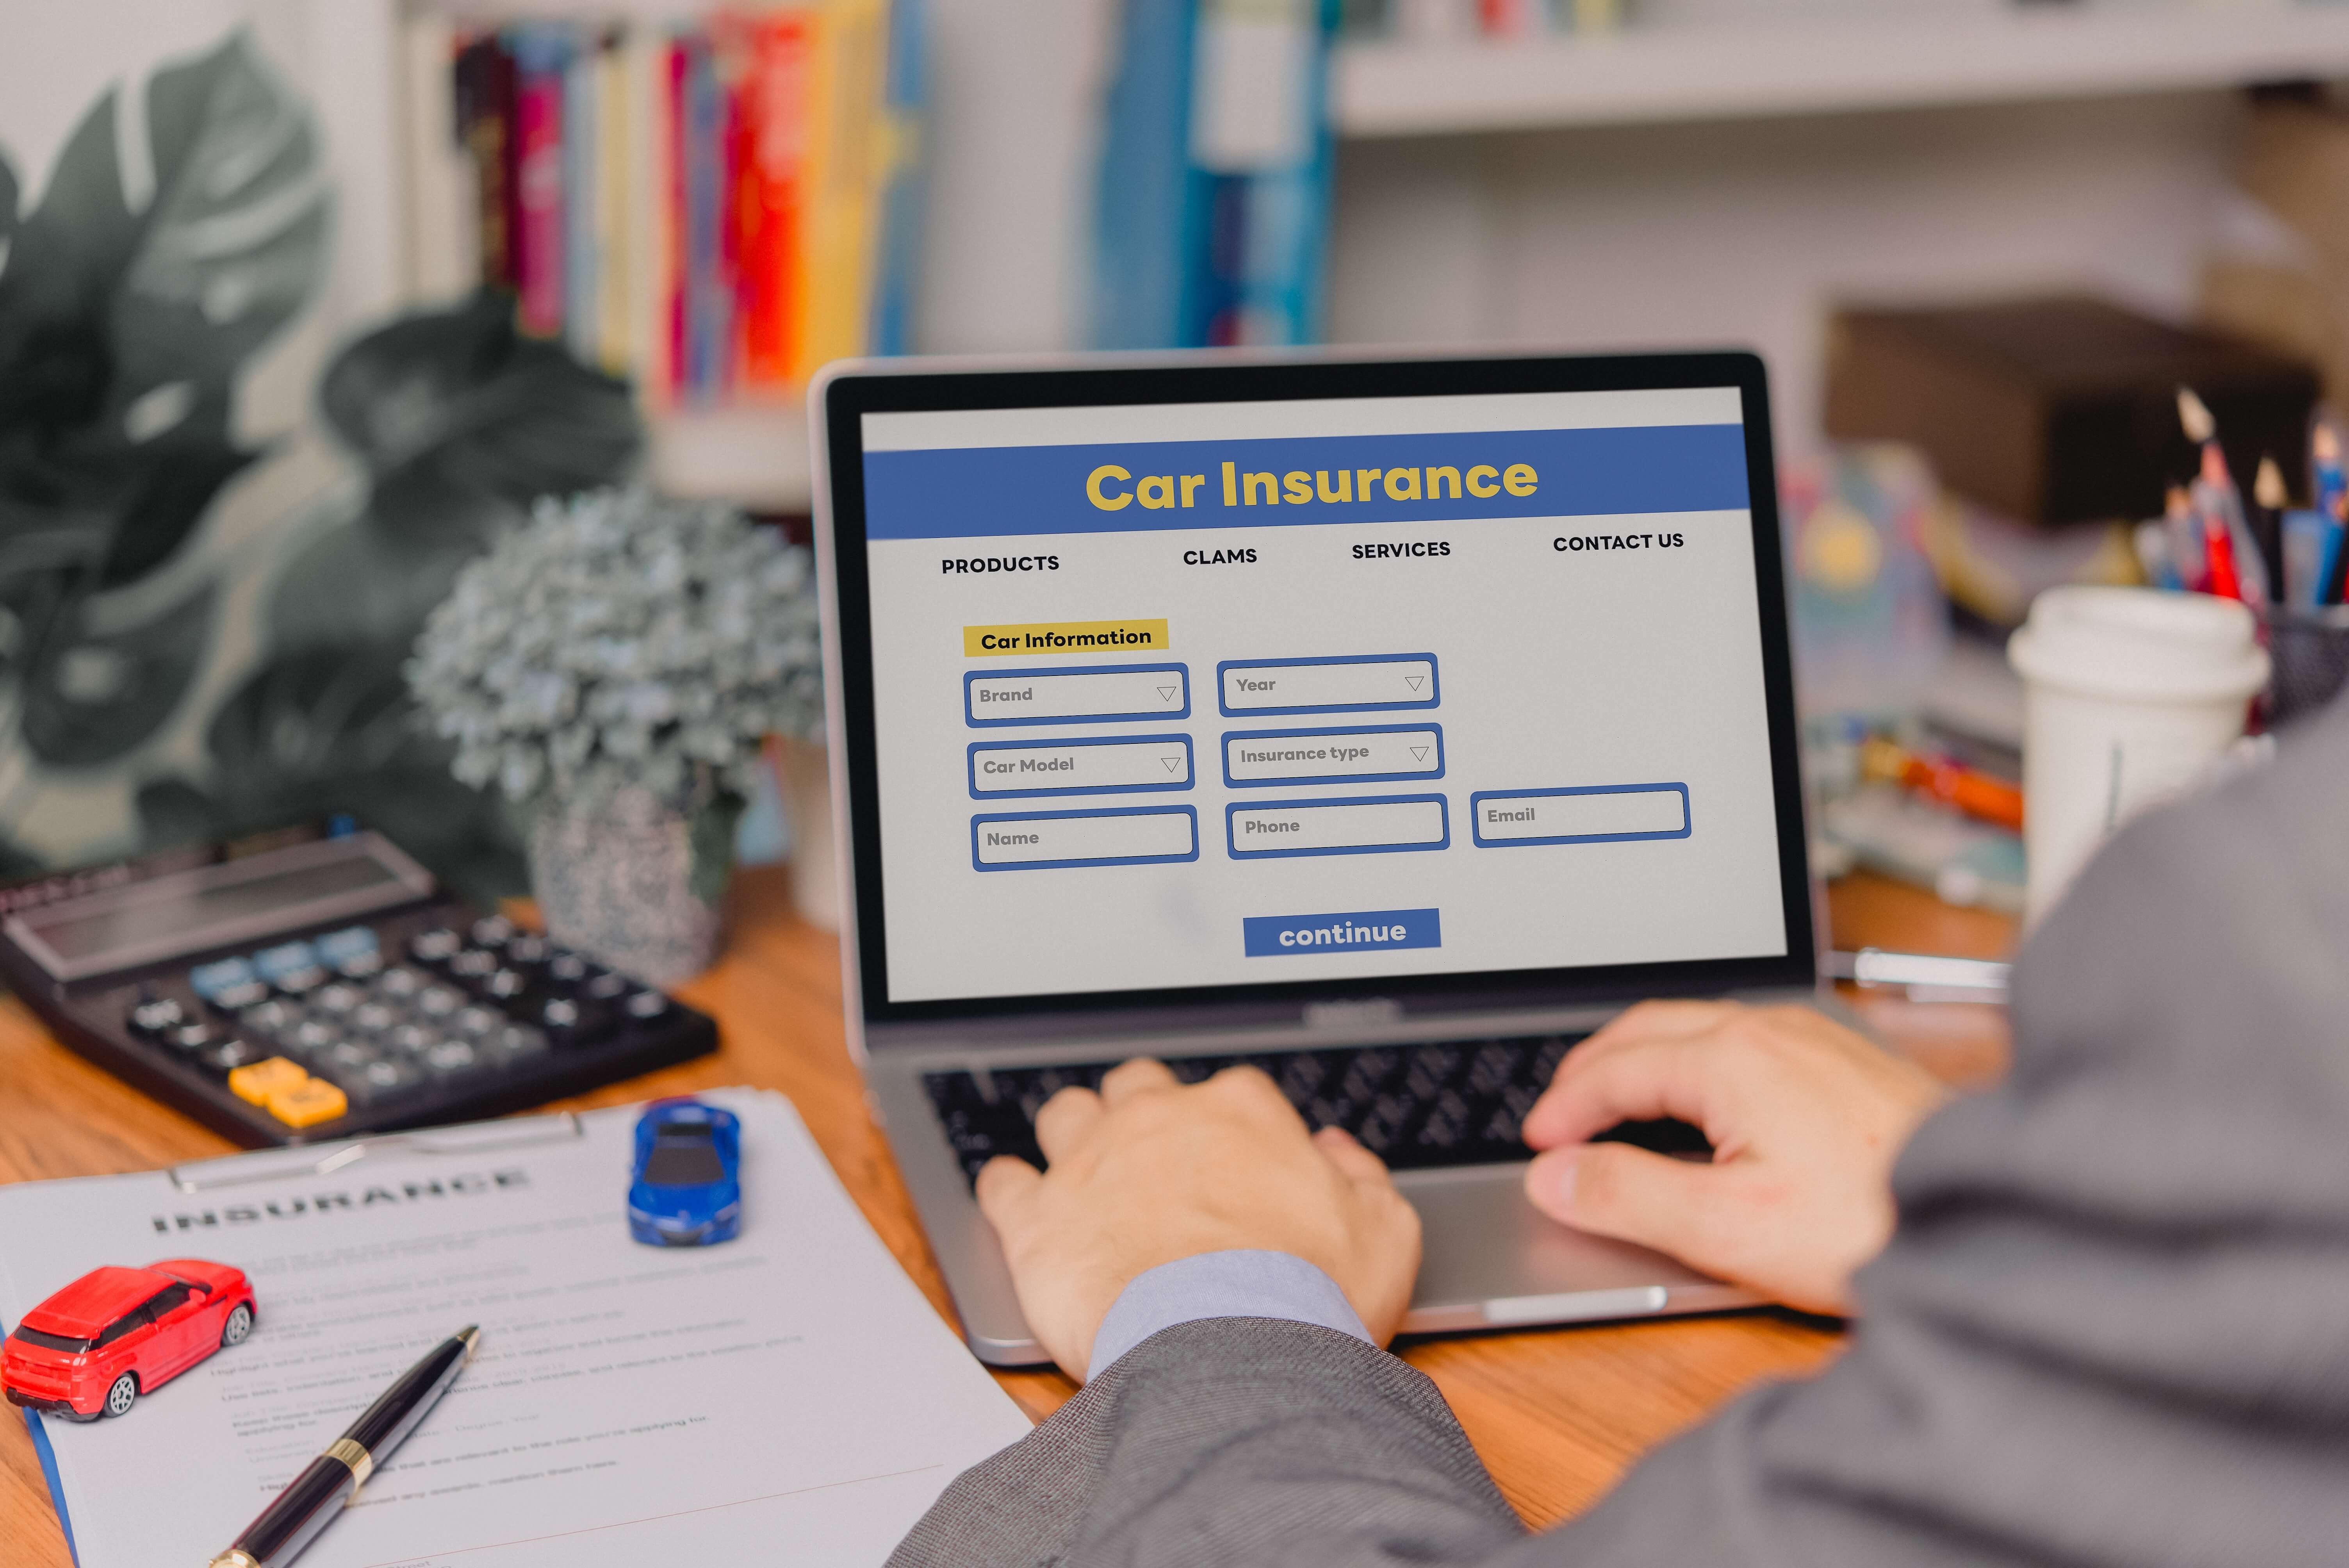 Car Insurance for new drivers has increased by over 10%